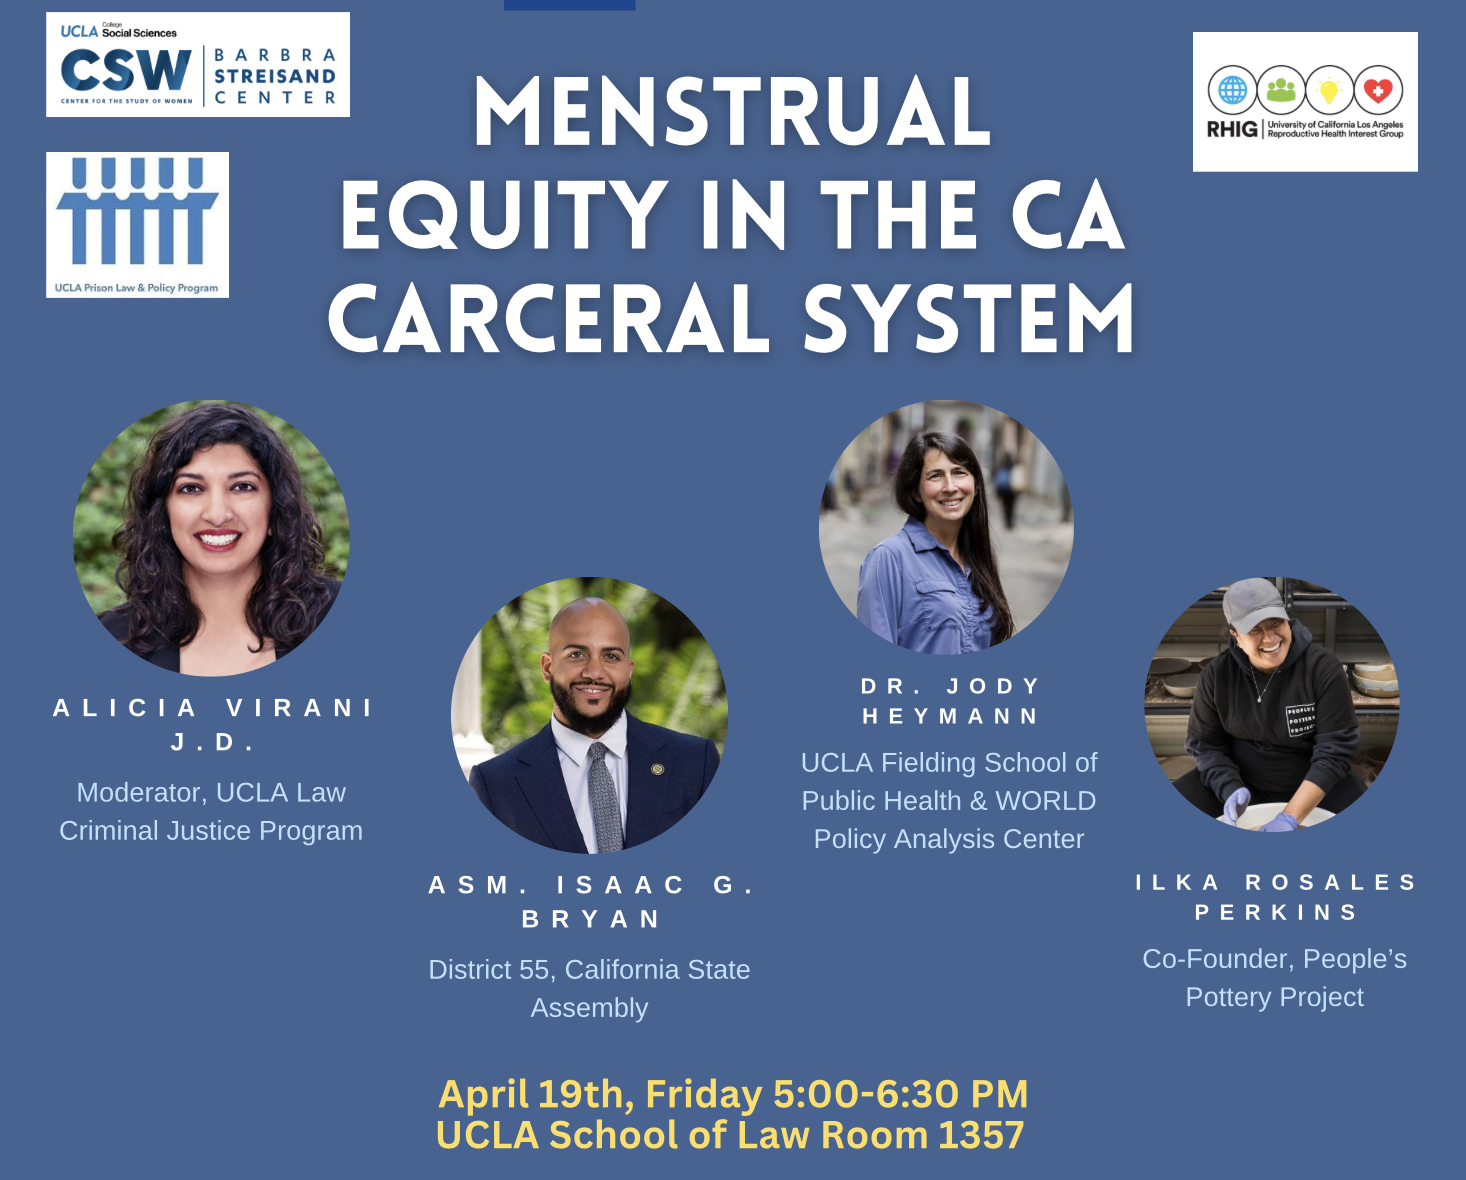 UCLA Law Menstrual Equity in the Carceral System